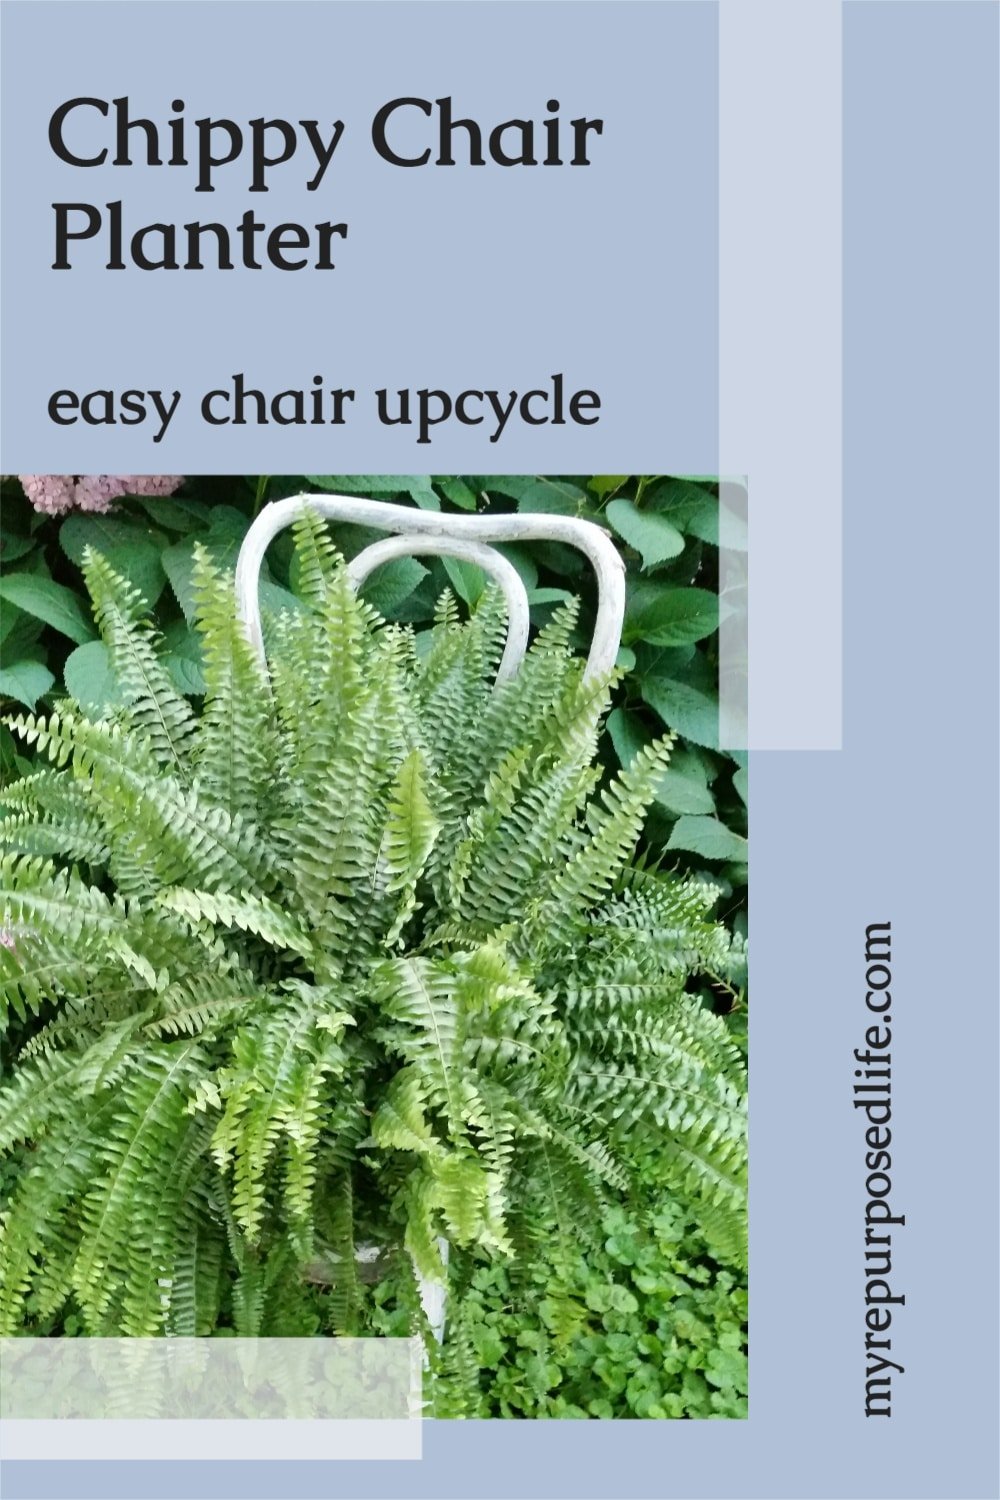 A old dilapidated chair makes the perfect chippy chair planter. Add a little white wash, pop in a plant and you're good to go. #MyRepurposedLife #upcycled #repurposed #chair #planter #garden via @repurposedlife